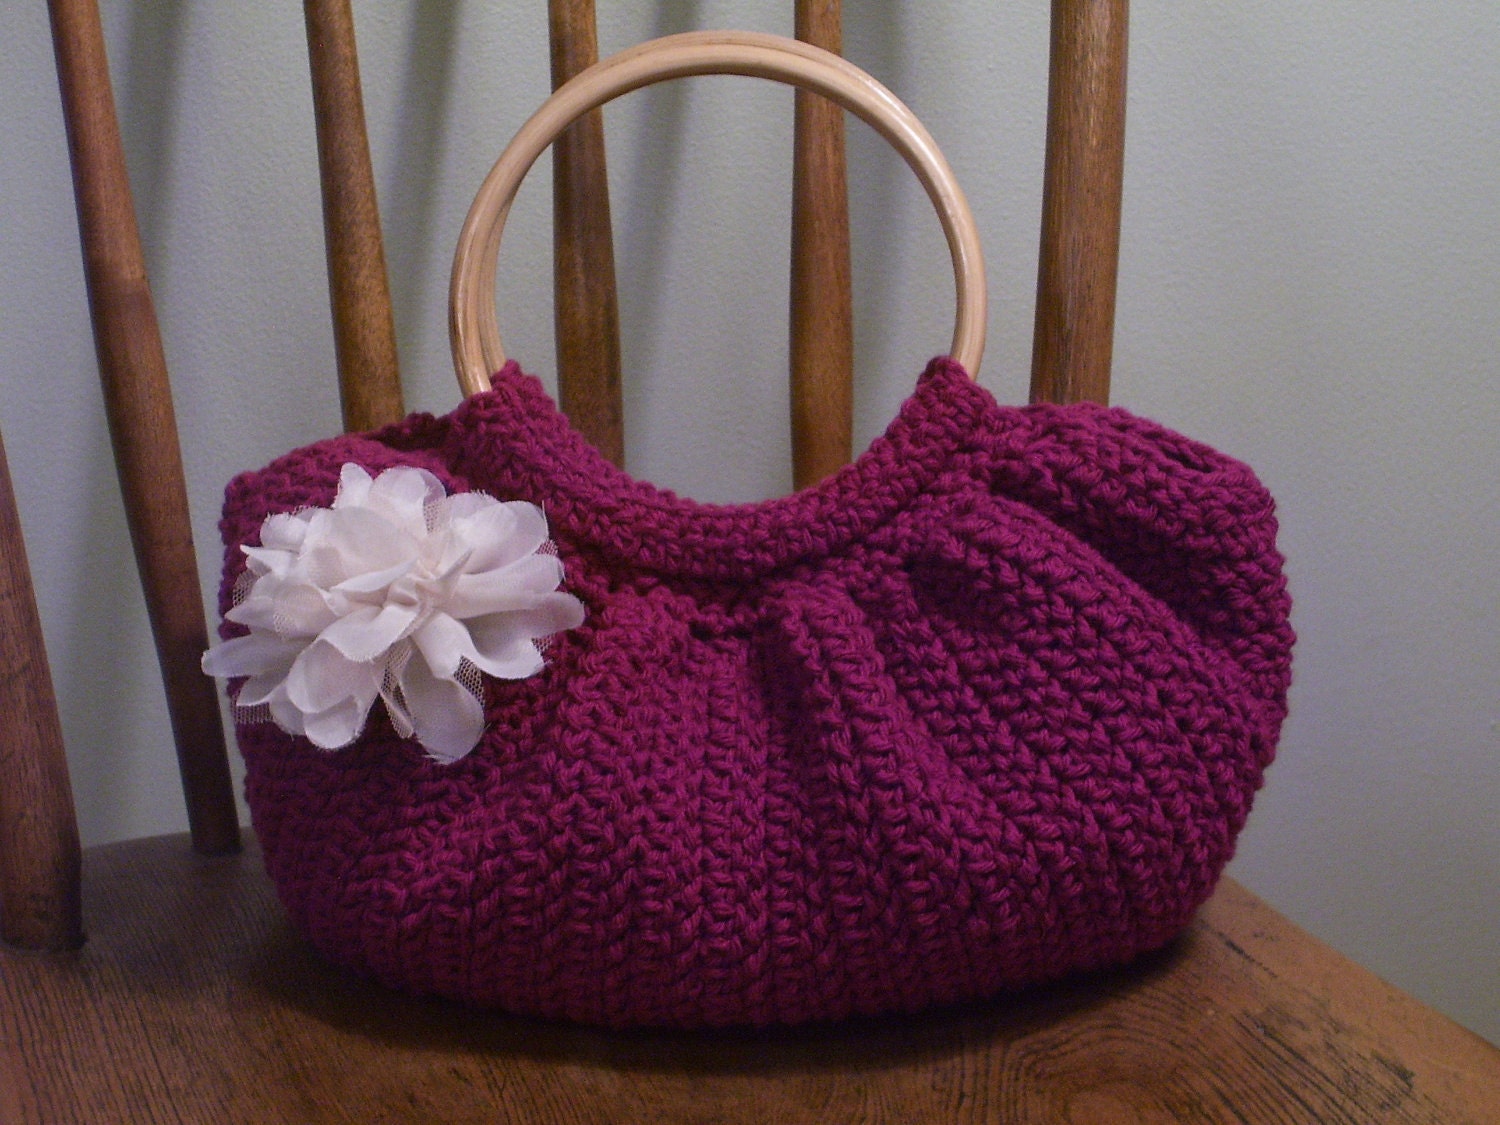 Crochet Pattern + Purse With Circle Handles | Free